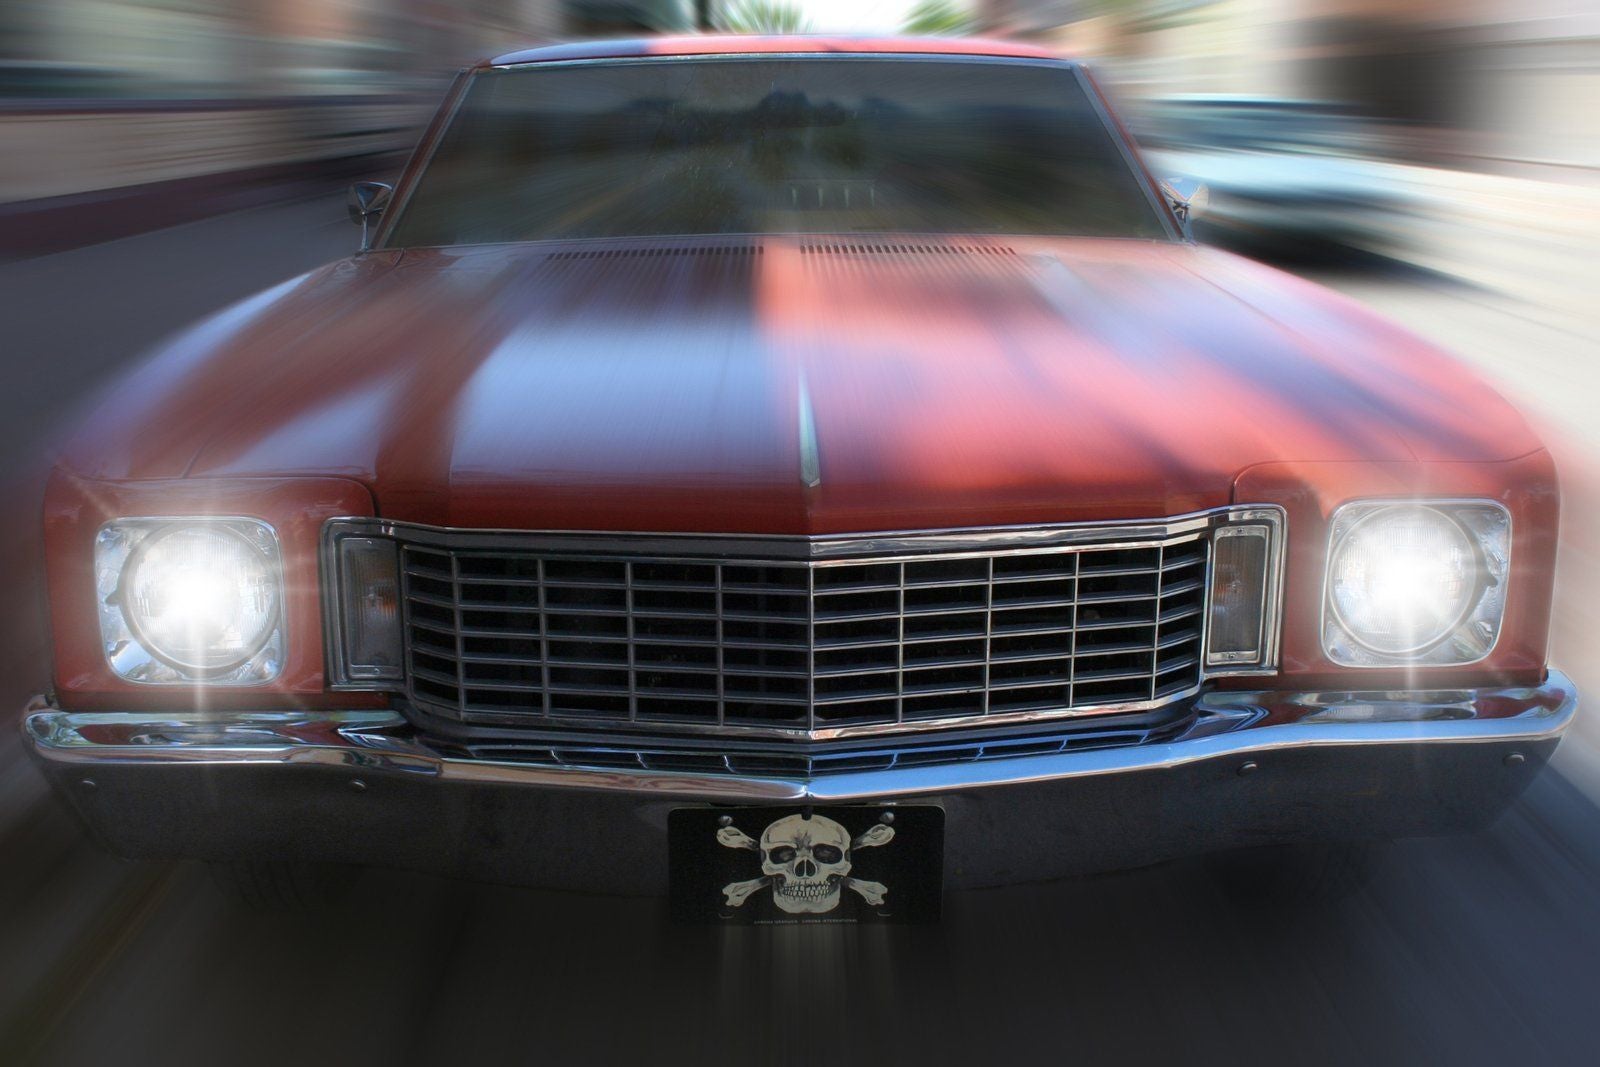 image of the front of a car with a skull and cross bones license plate